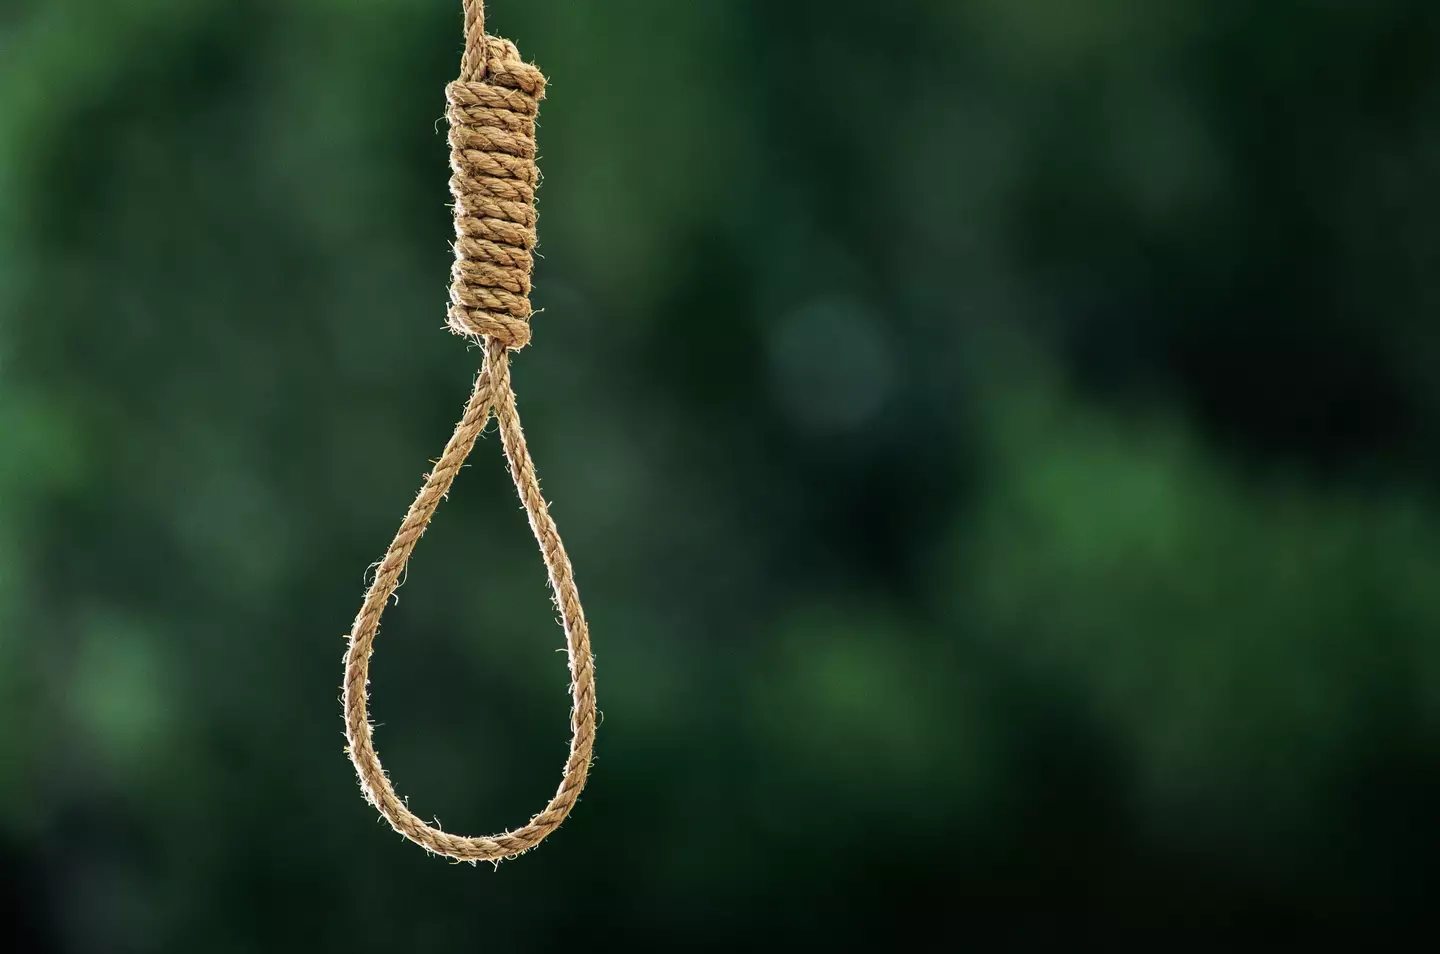 Hanging is still a widely-used method of execution.